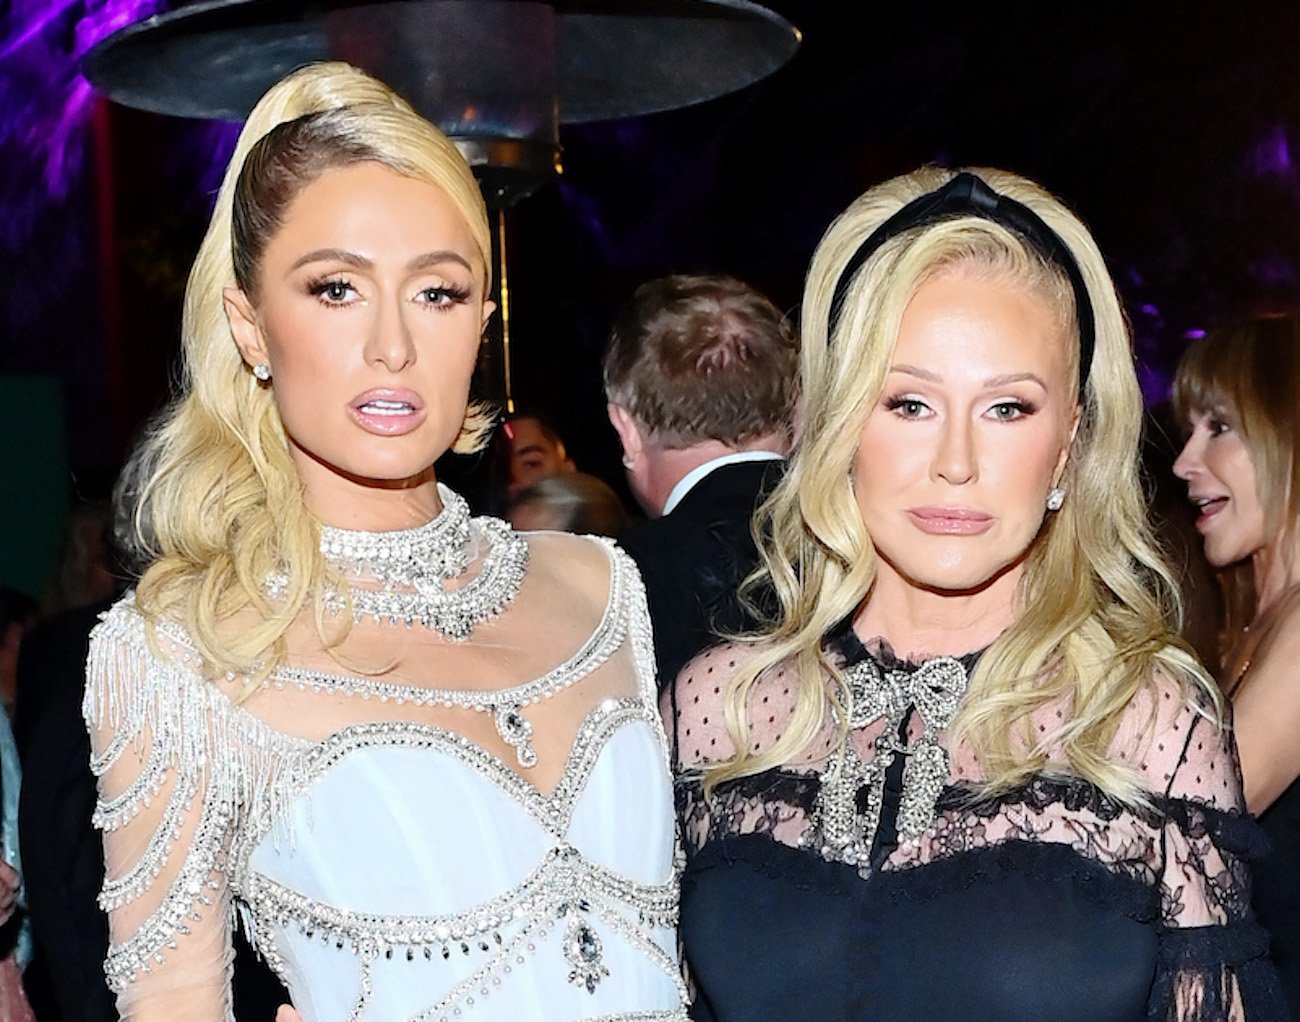 Paris Hilton and Kathy Hilton pose together wearing white and black gowns